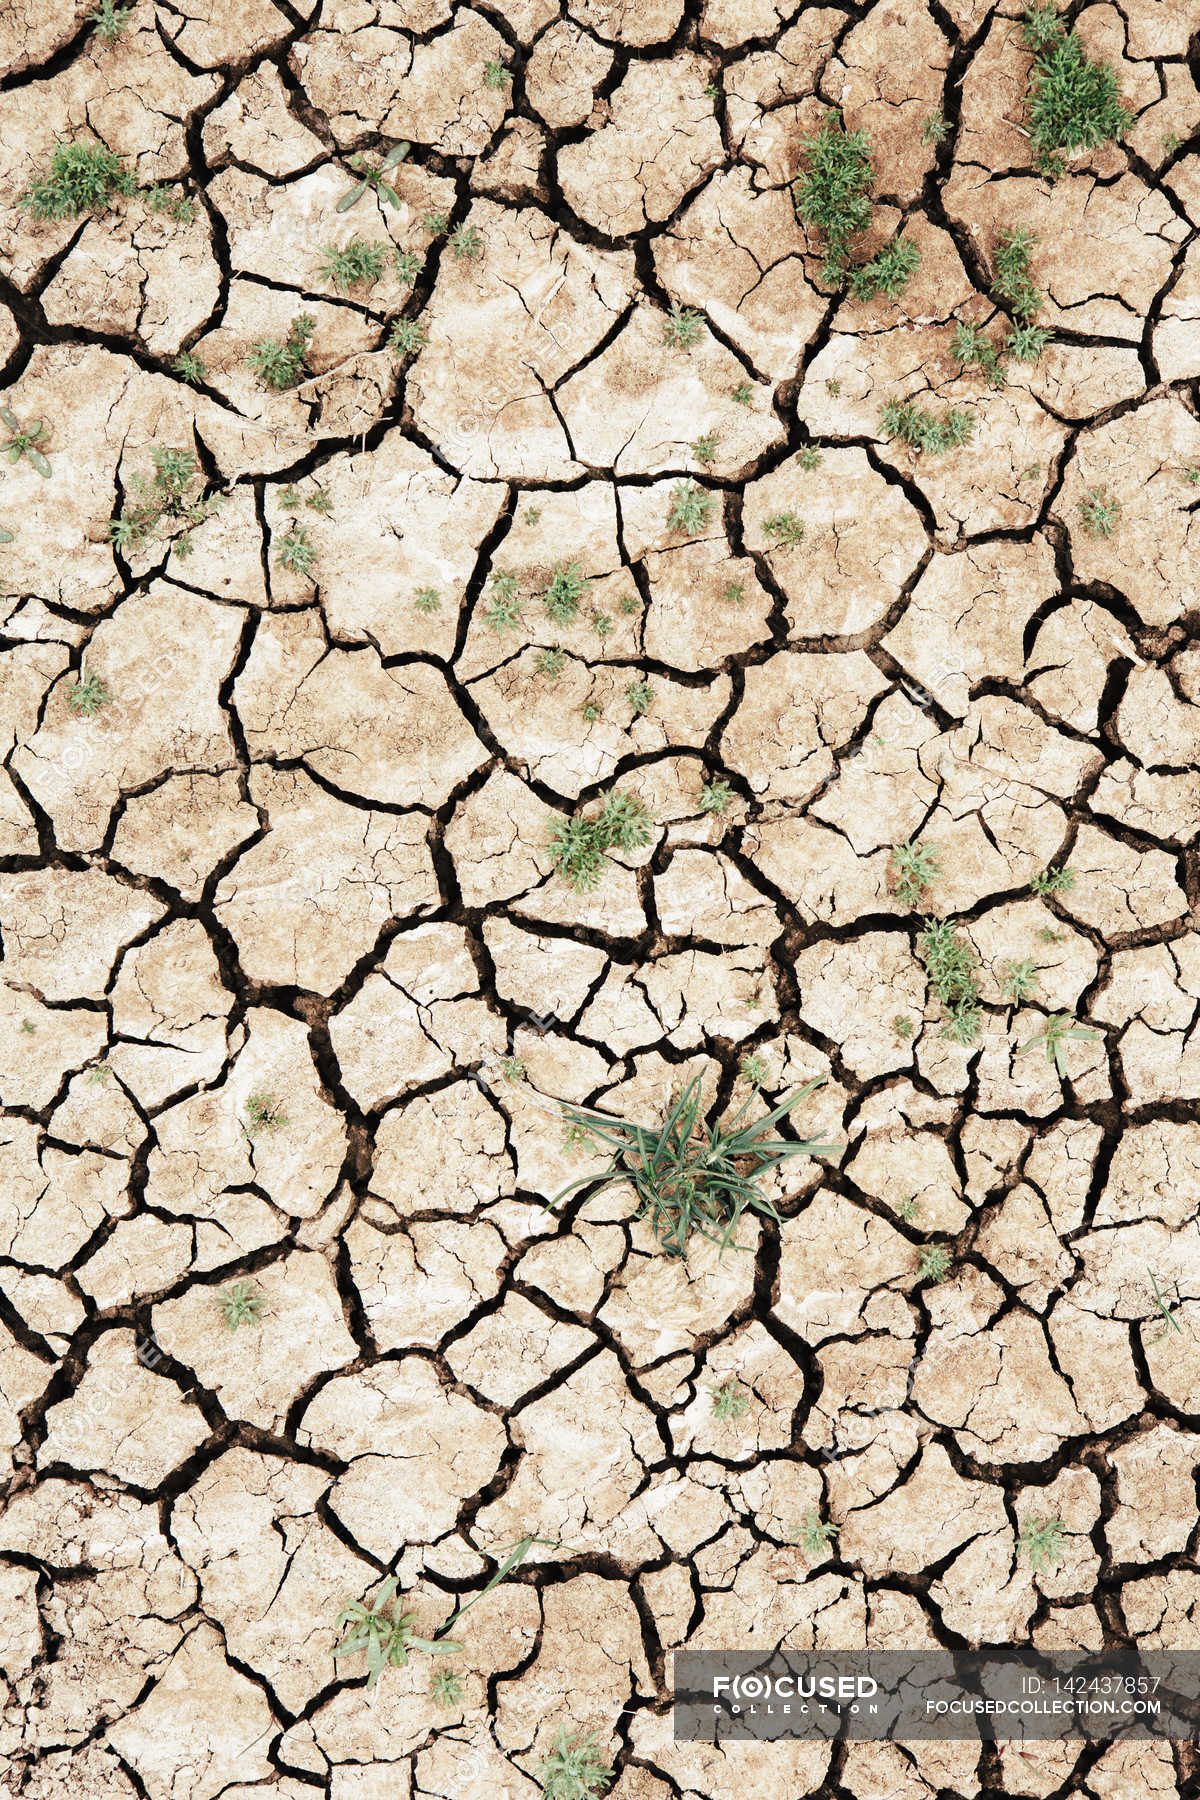 Cracked parched soil surface — Stock Photo | #142437857